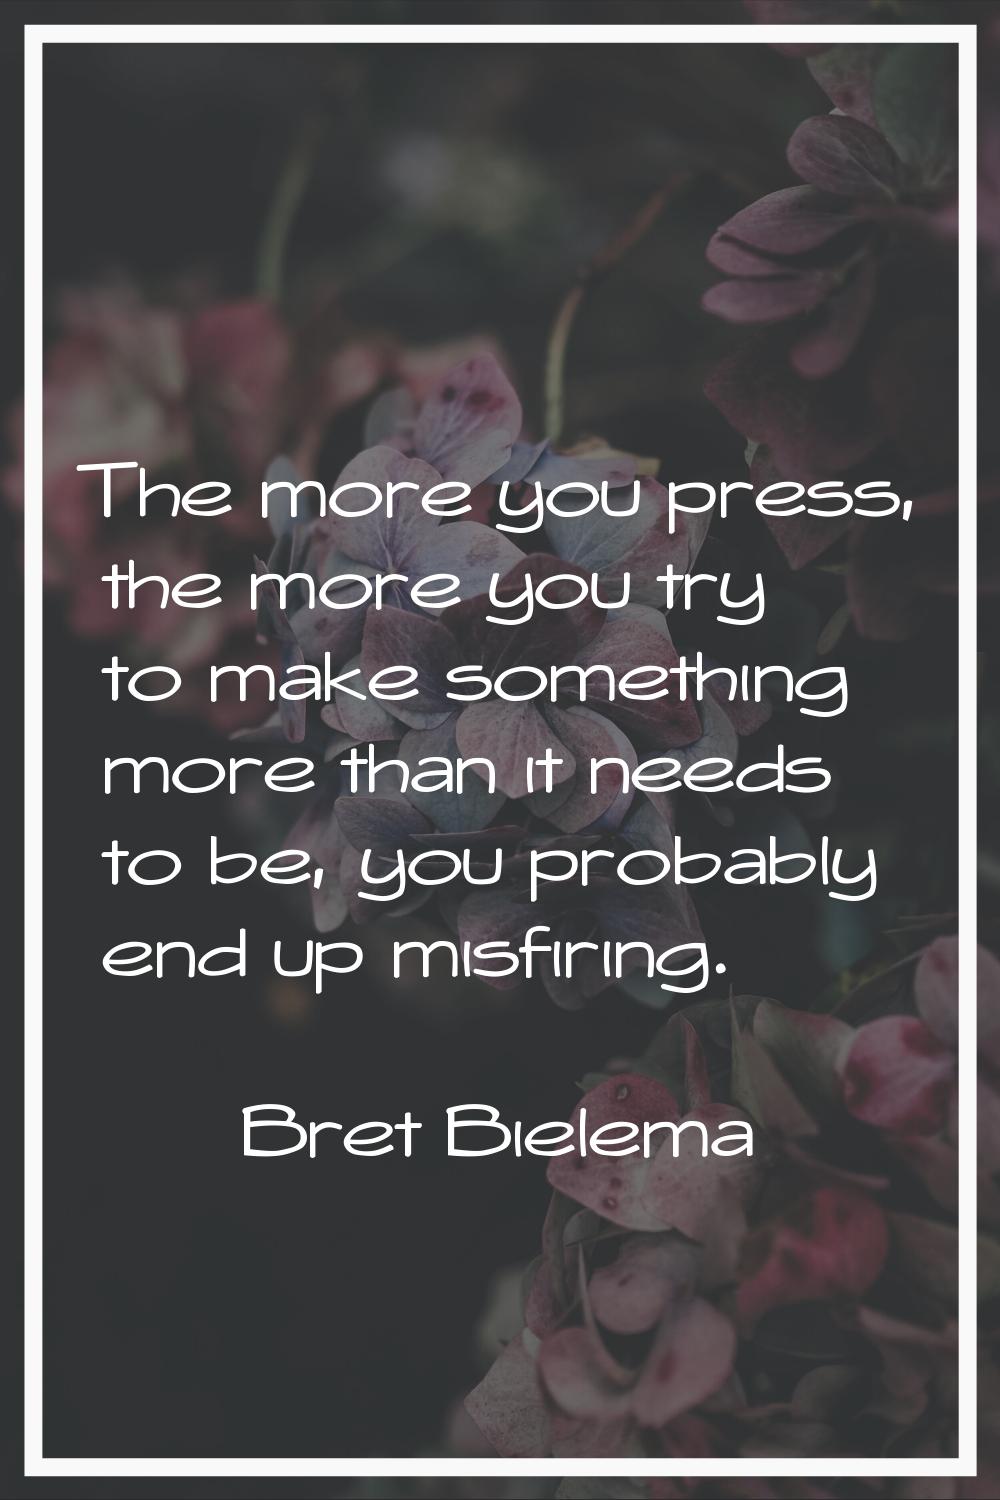 The more you press, the more you try to make something more than it needs to be, you probably end u